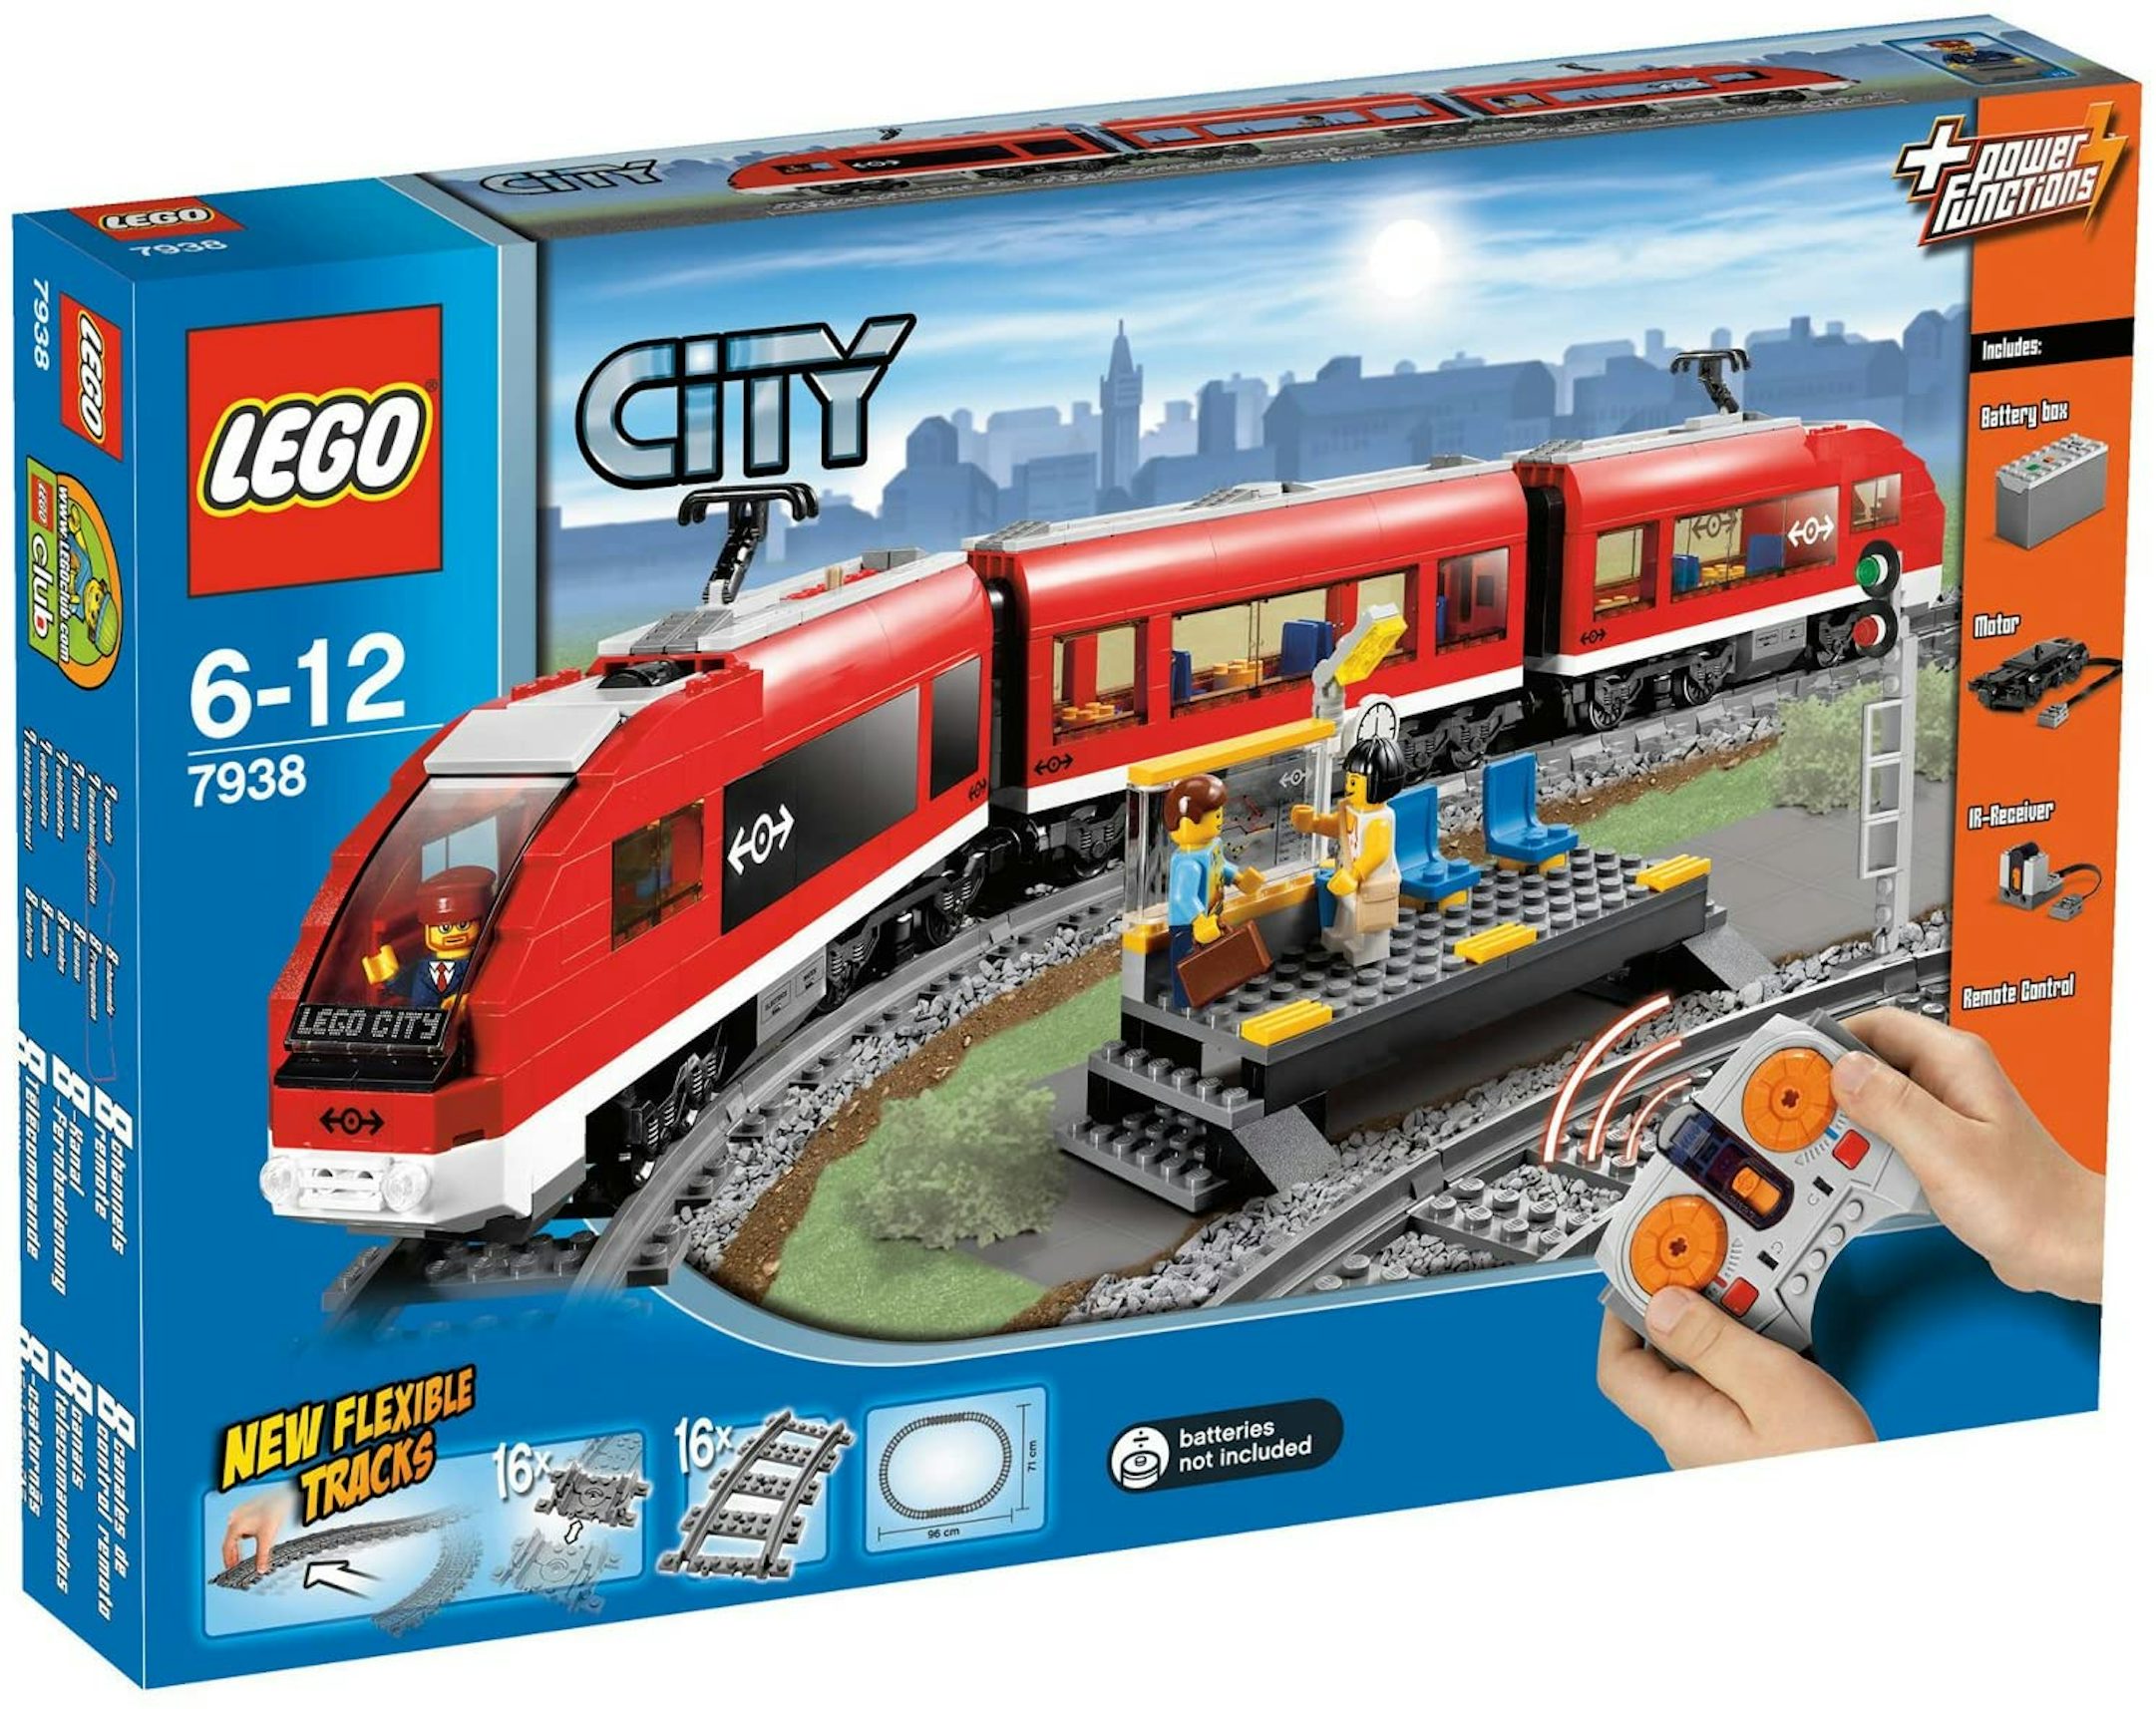 How to Build the LEGO City Express Passenger Train Set - History